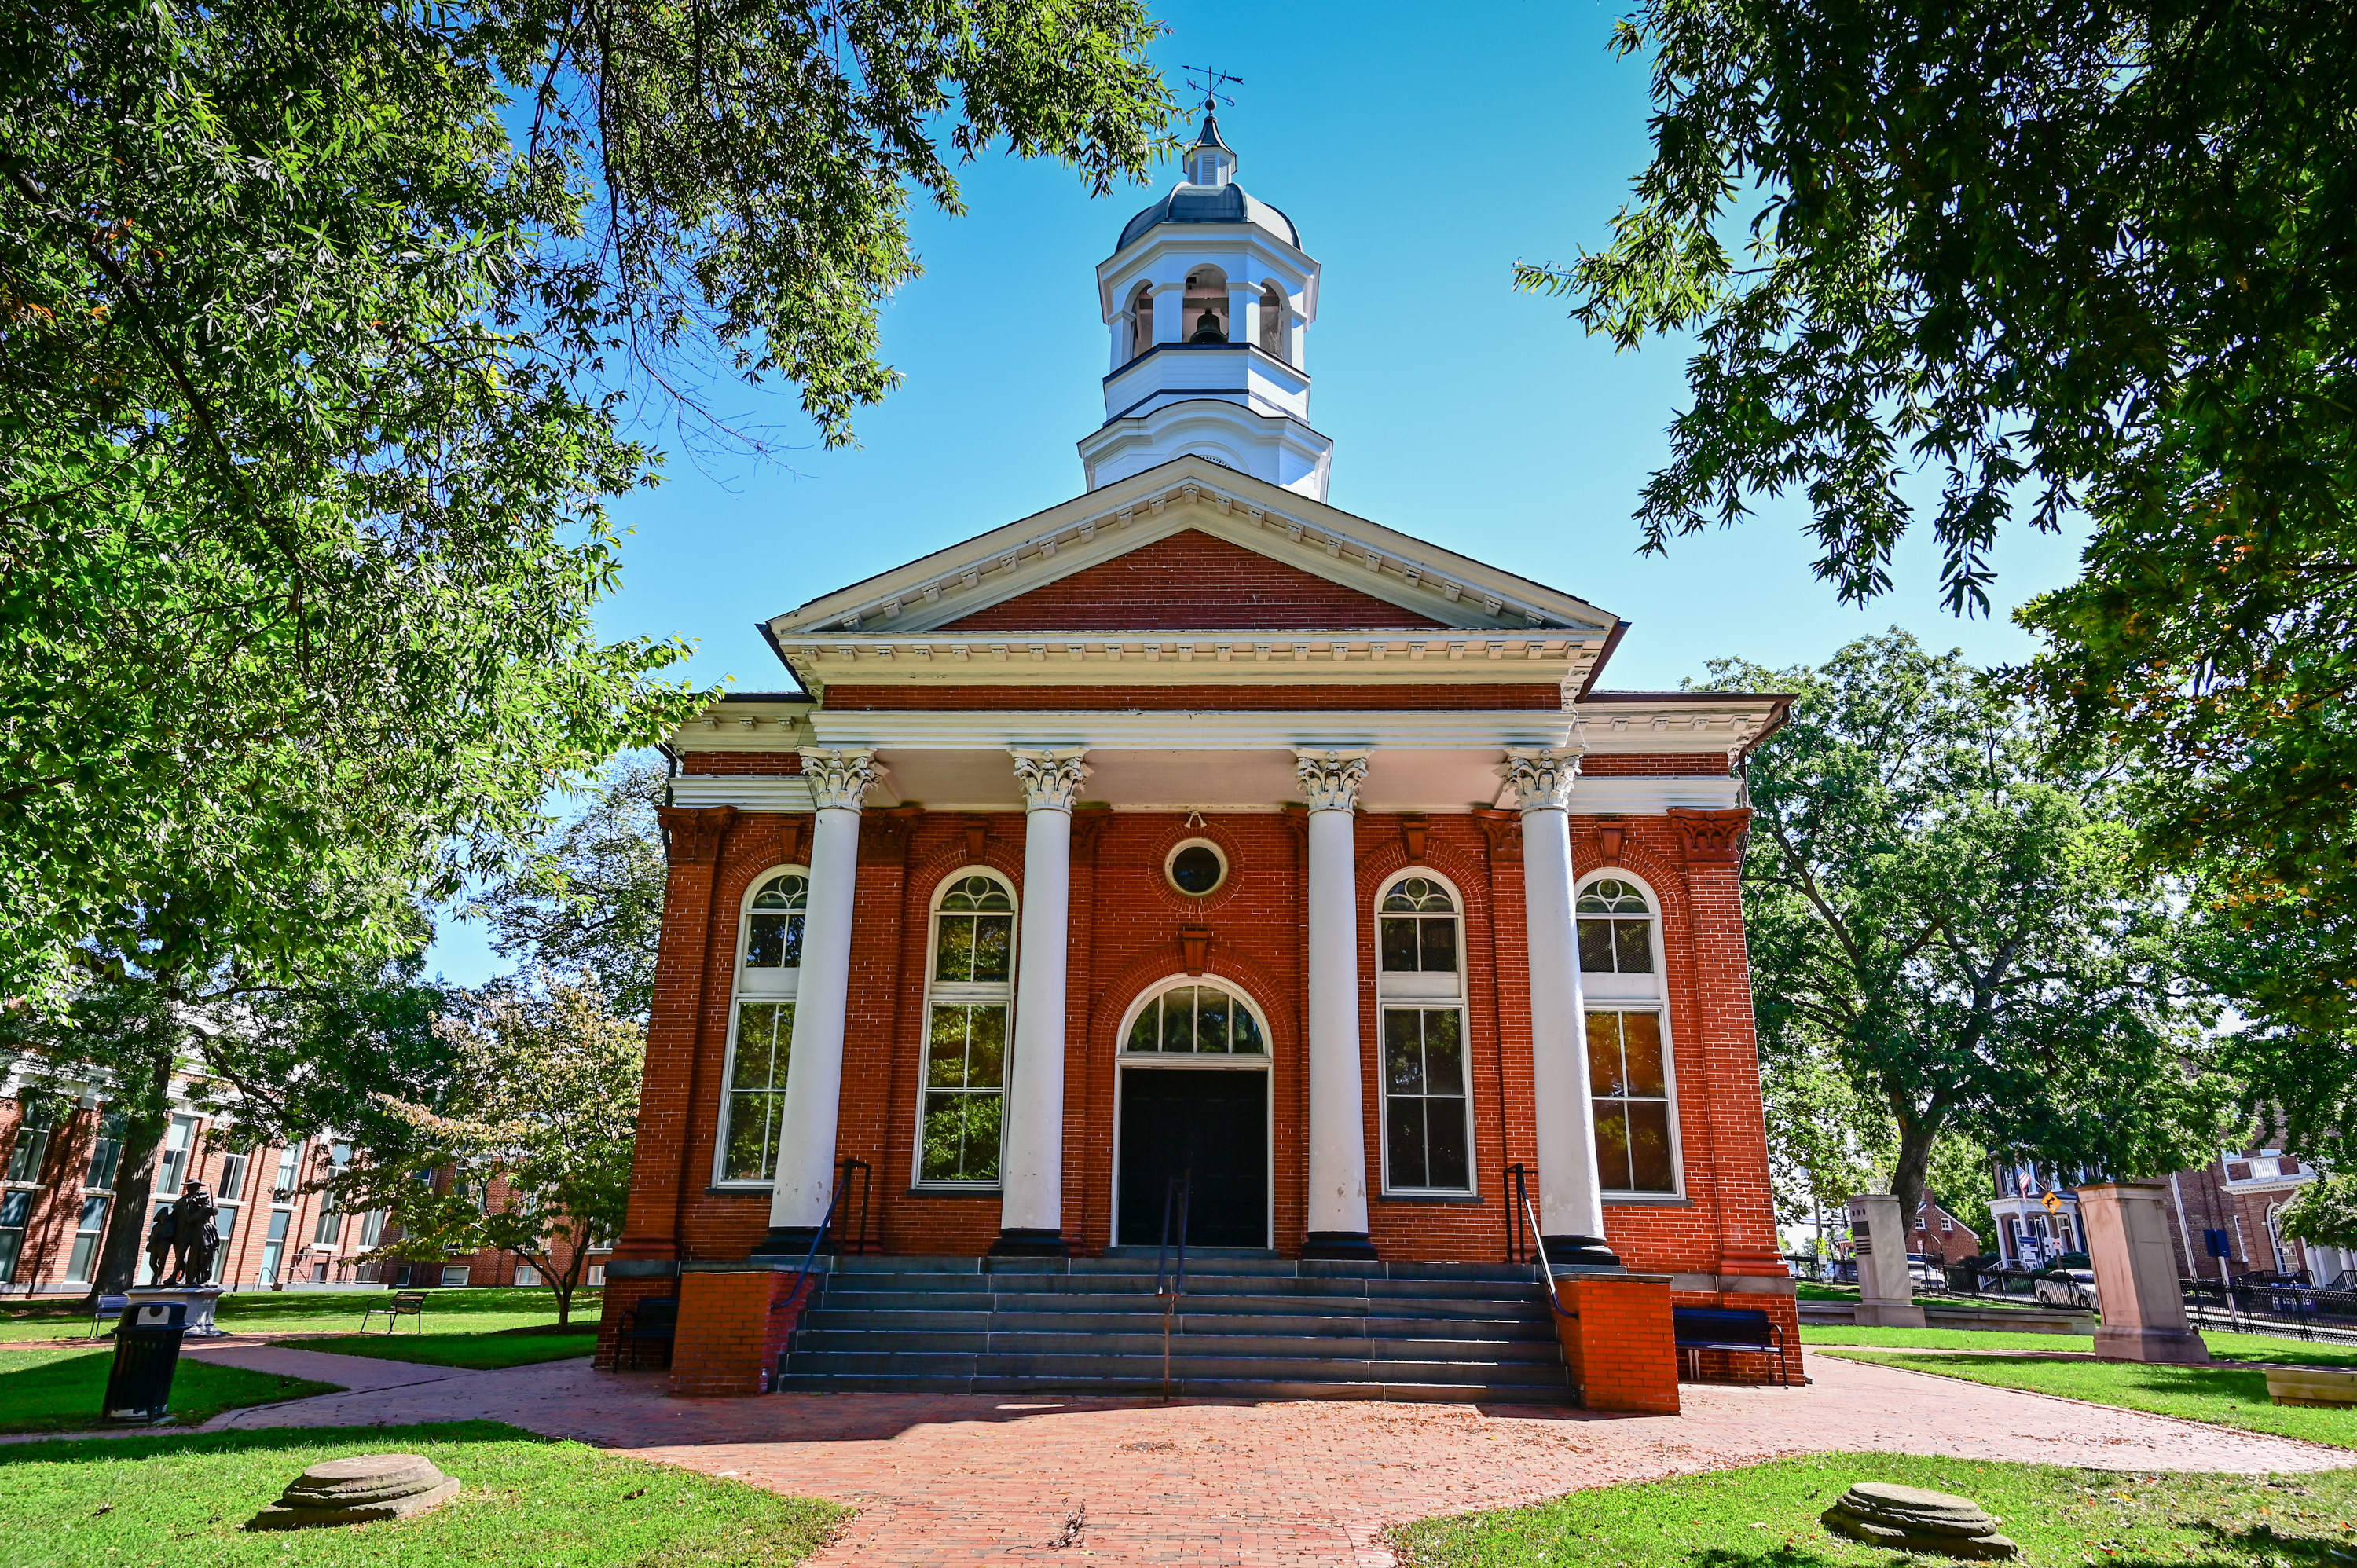 Historical courthouse in Leesburg, VA